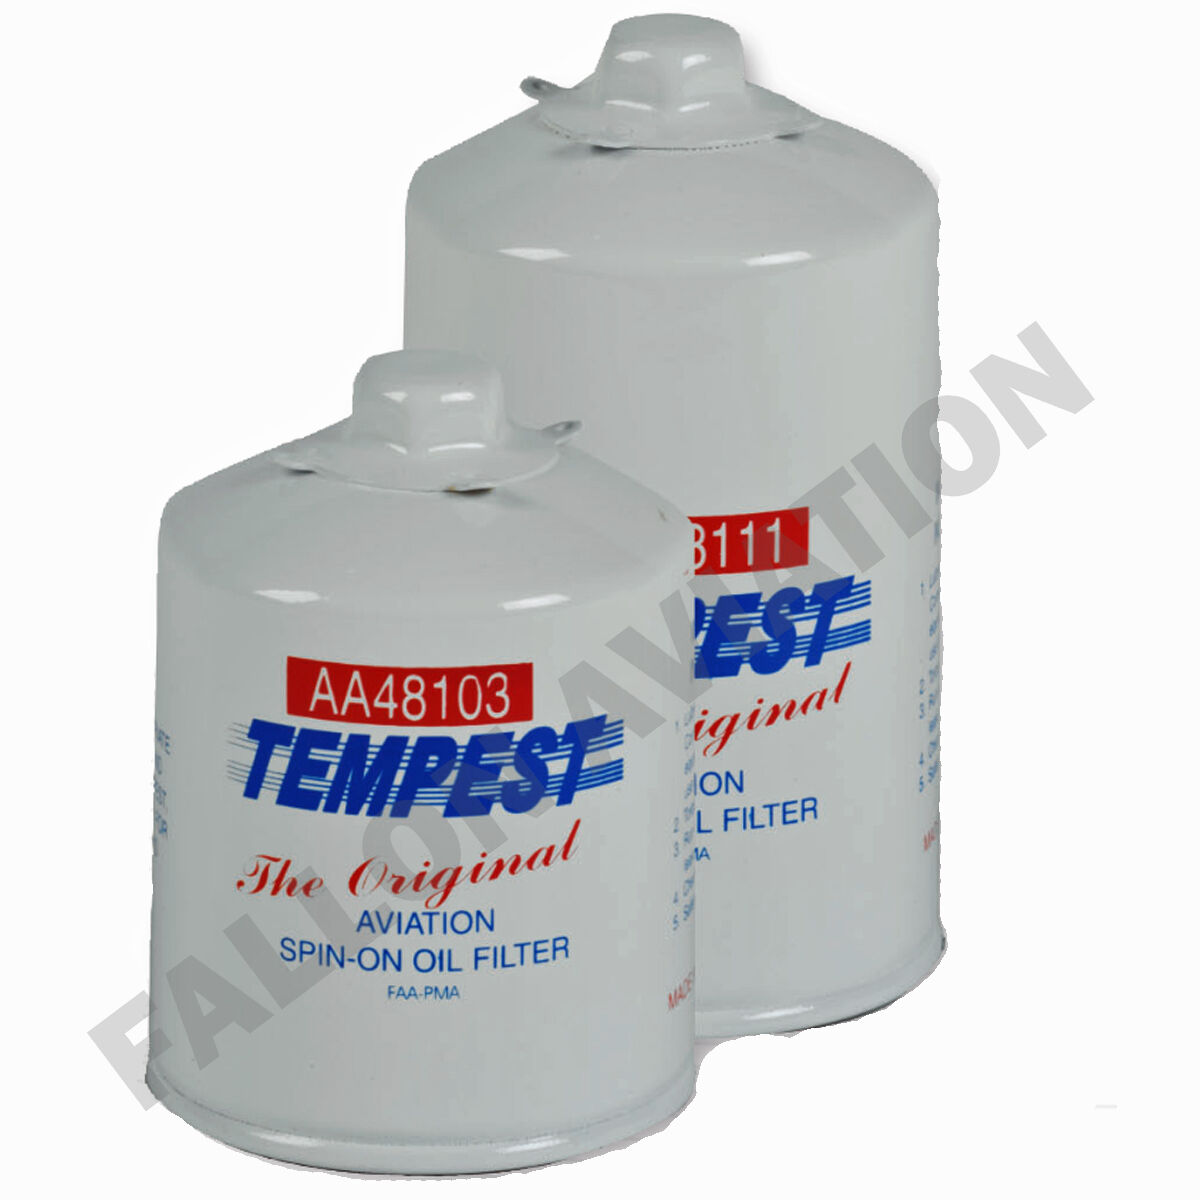 Tempest Aircraft Oil Filter - AA48109 - Aviation Spin-On Oil Filter